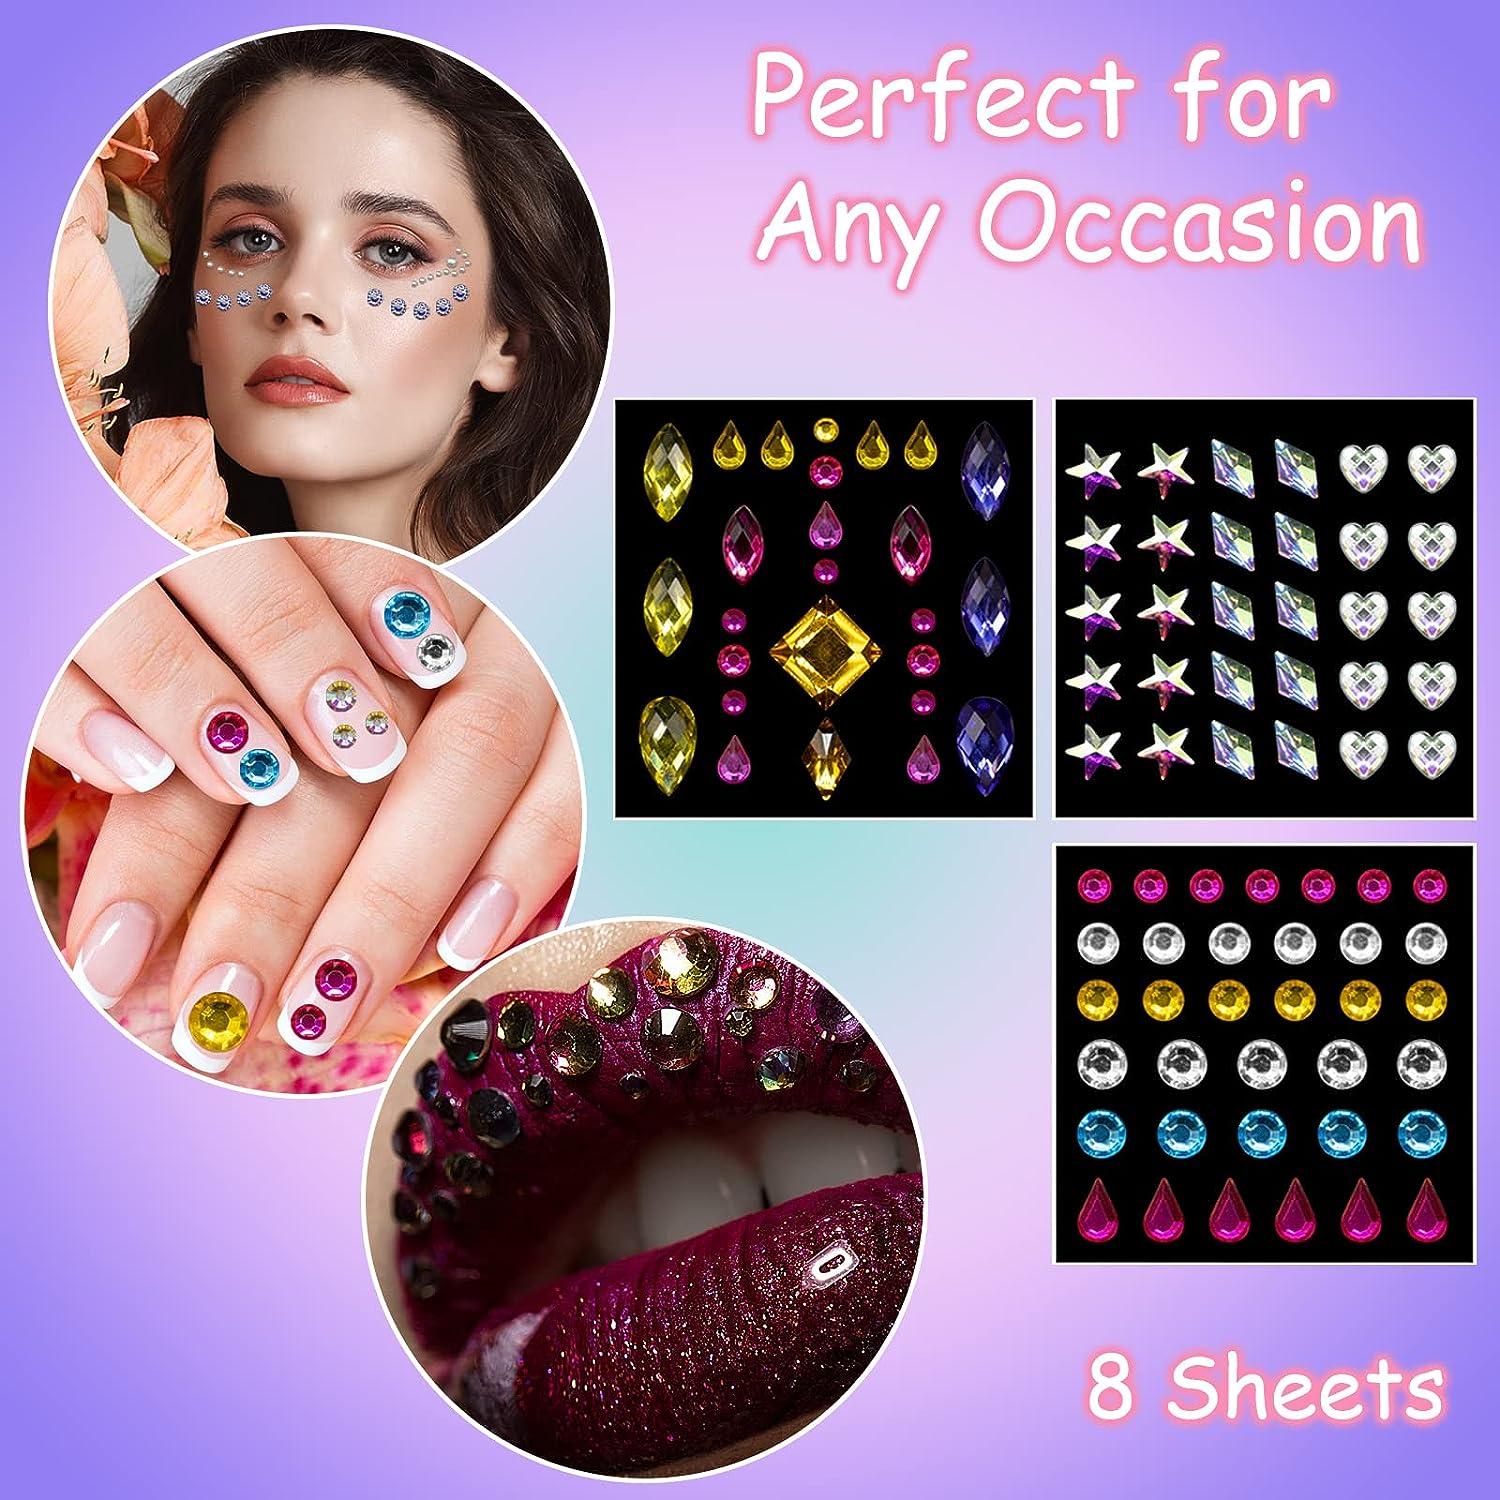 Bomutovy Face Gems Face Jewels Stick on Eye Jewels Face Rhinestones for Makeup Eye Body Nail Face Gems Rhinestone Stickers for Girls and Women, Size